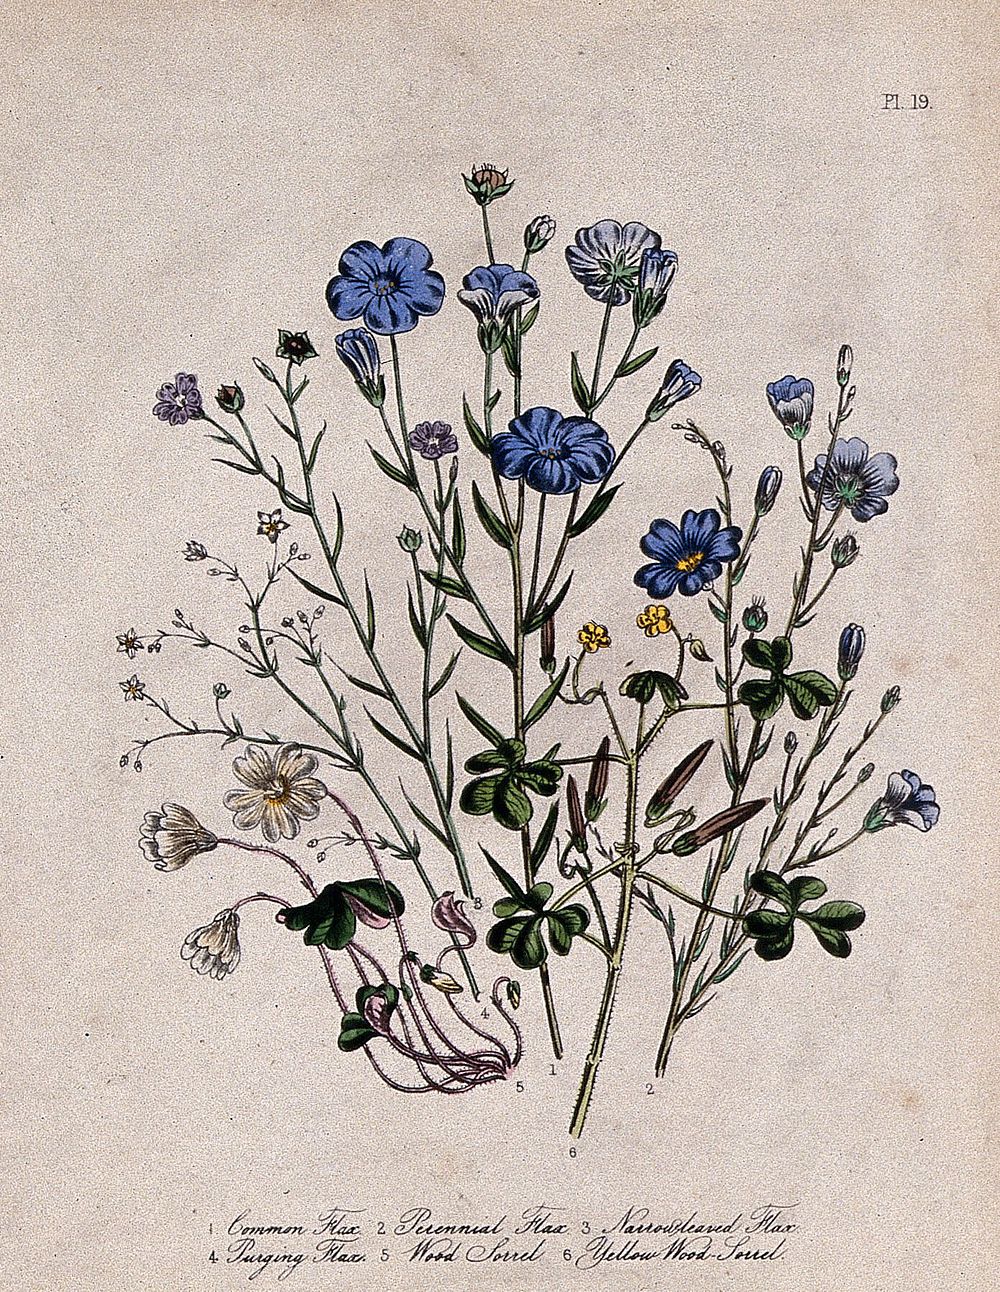 Six British wild flowers, four types of flax (Linum species) and two wood sorrel (Oxalis). Coloured lithograph, c. 1846…